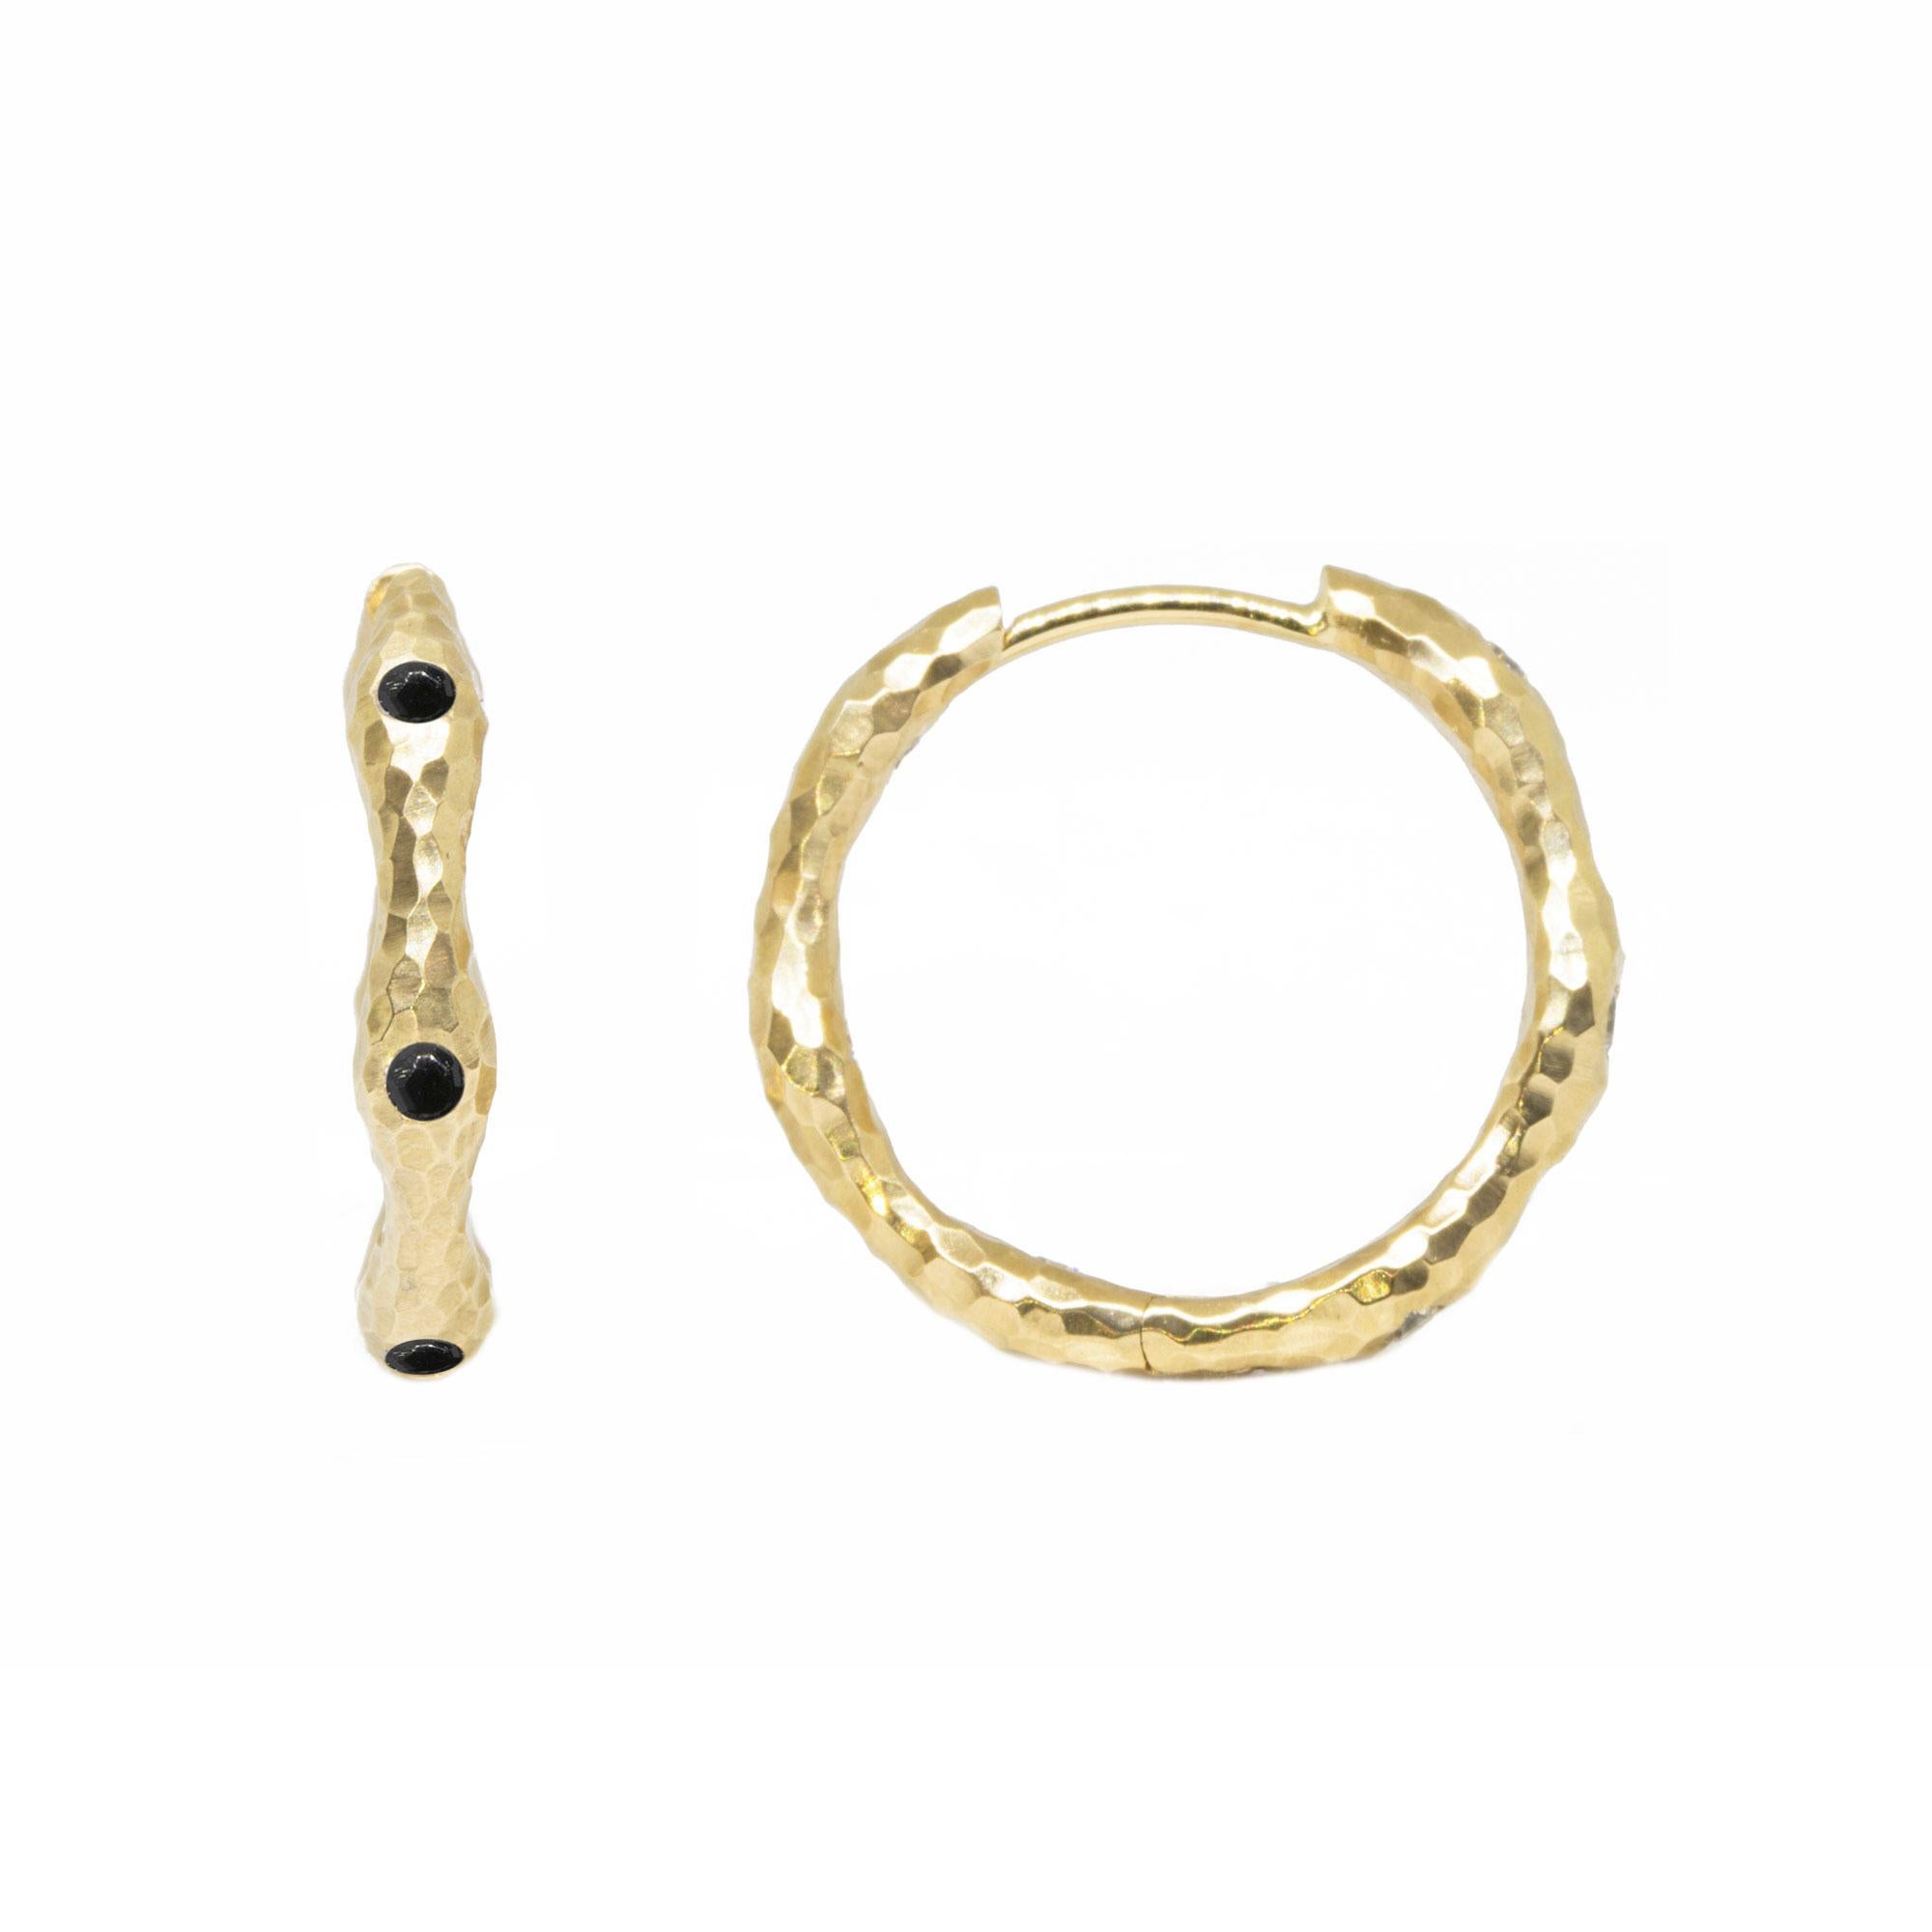 The black spinel accented Gold Forged Hoop Earrings are made for dangling your favorite Charms (or a few). Or wear them on their own for an effortless, understated look. 

Details
Metal: 14K Yellow Gold
Stone carat: 1.25
Size: 22mm
Stone size: